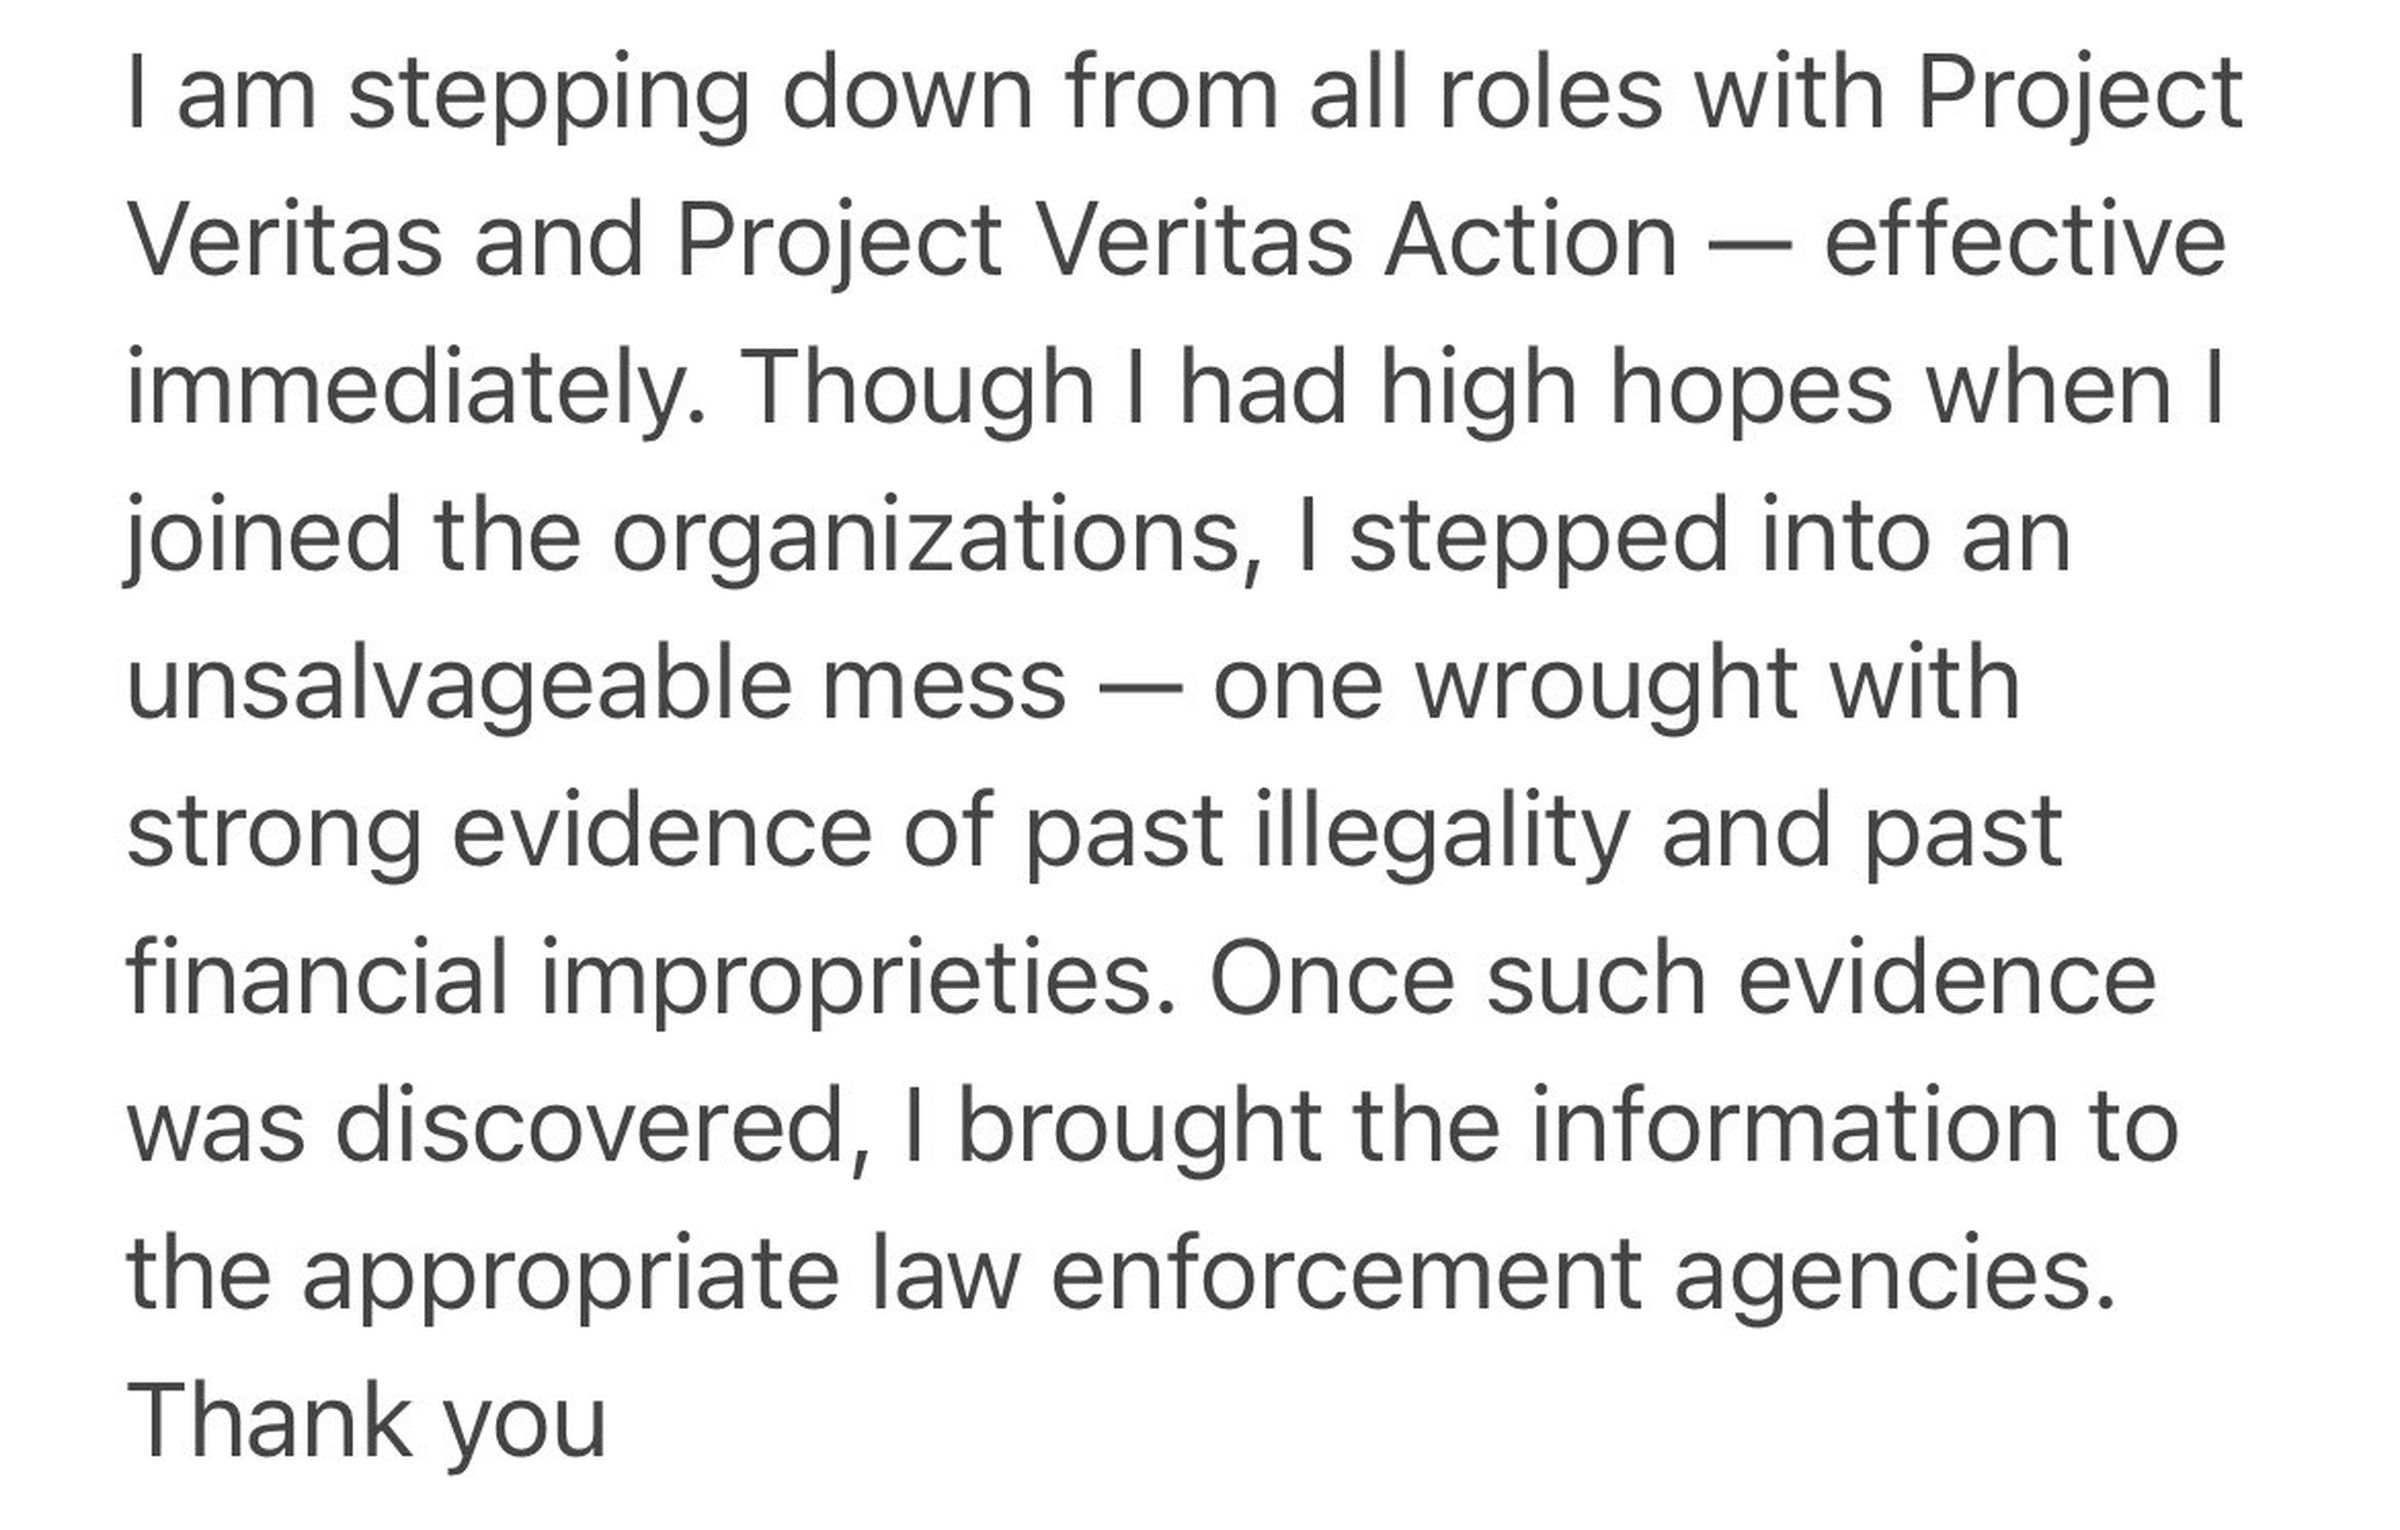 Statement from Hannah Giles: “I am stepping down from all roles with Project Veritas and Project Veritas Action — effective immediately, Though I had high hopes when I joined the organizations, I stepped into an unsalvageable mess — one wrought with strong evidence of past illegality and past financial improprieties. Once such evidence was discovered, I brought the information to the appropriate law enforcement agencies. Thank you